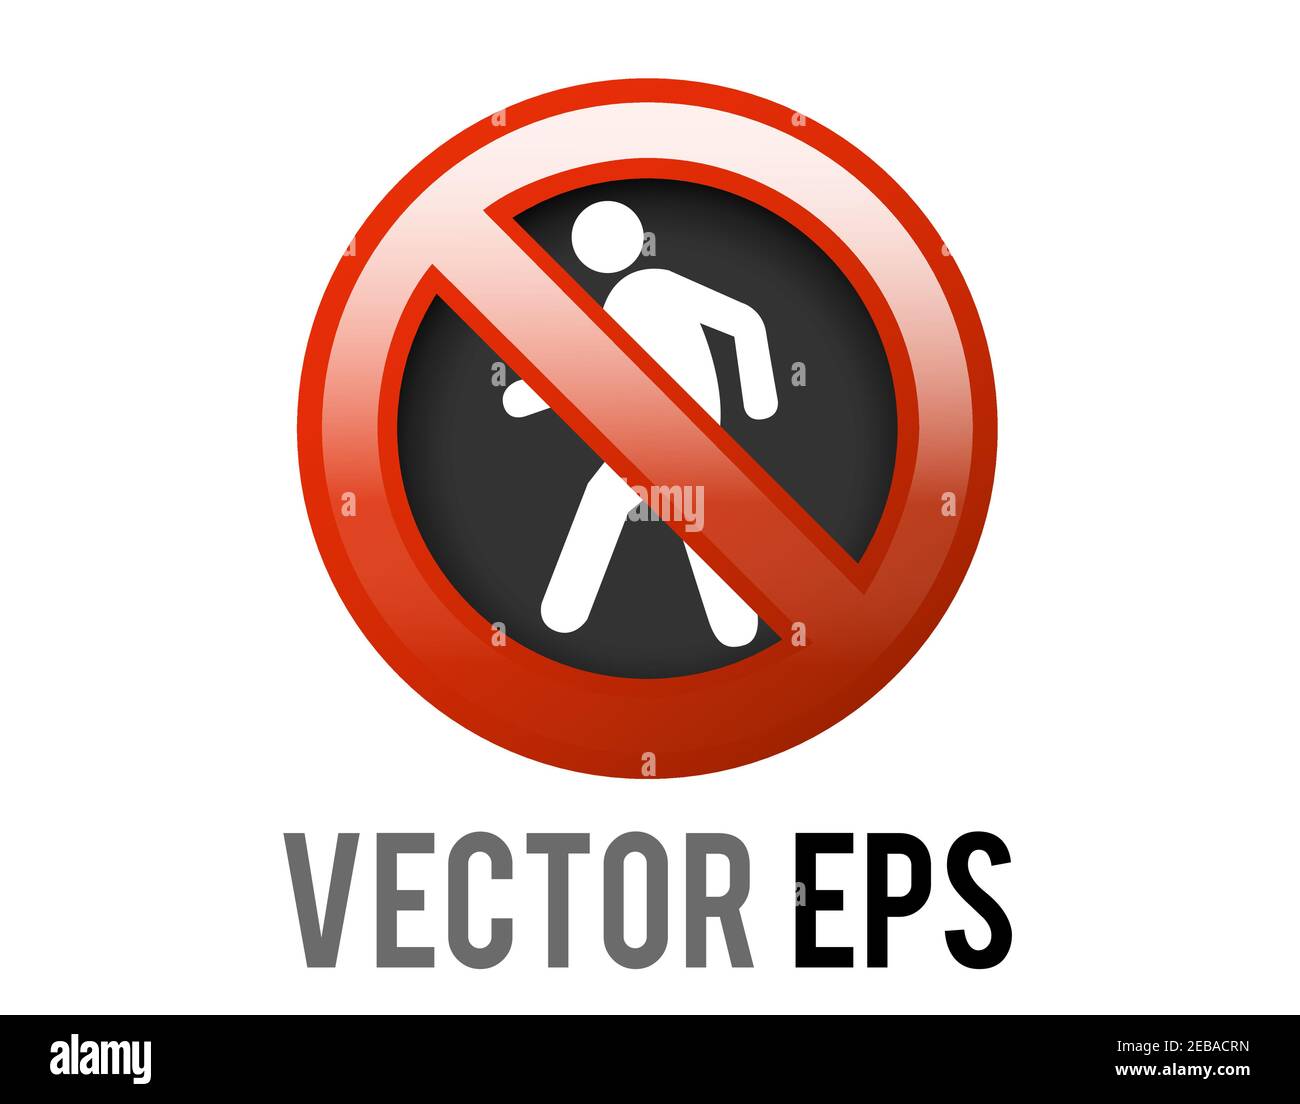 The isolated vector pedestrian symbol with red circle restricted icon, dedicated not suitable to be on foot Stock Vector